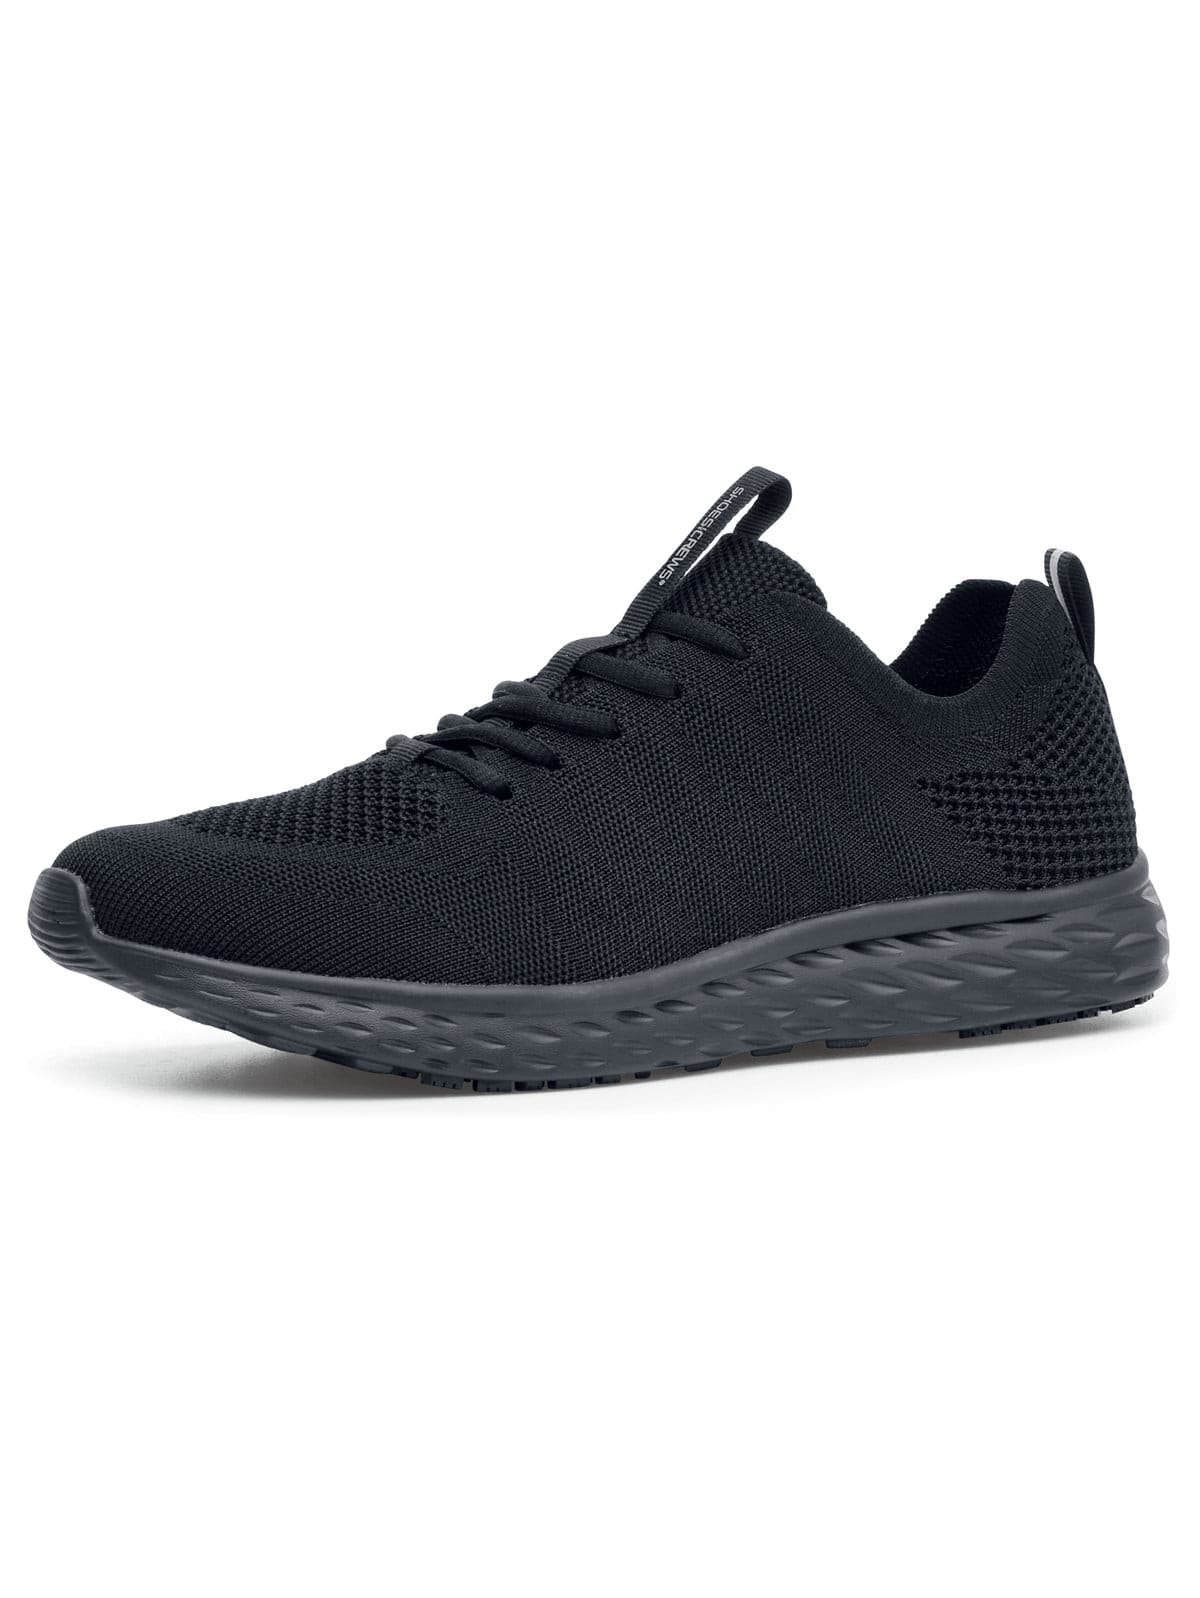 Women's Work Shoe Everlight Black by  Shoes For Crews.